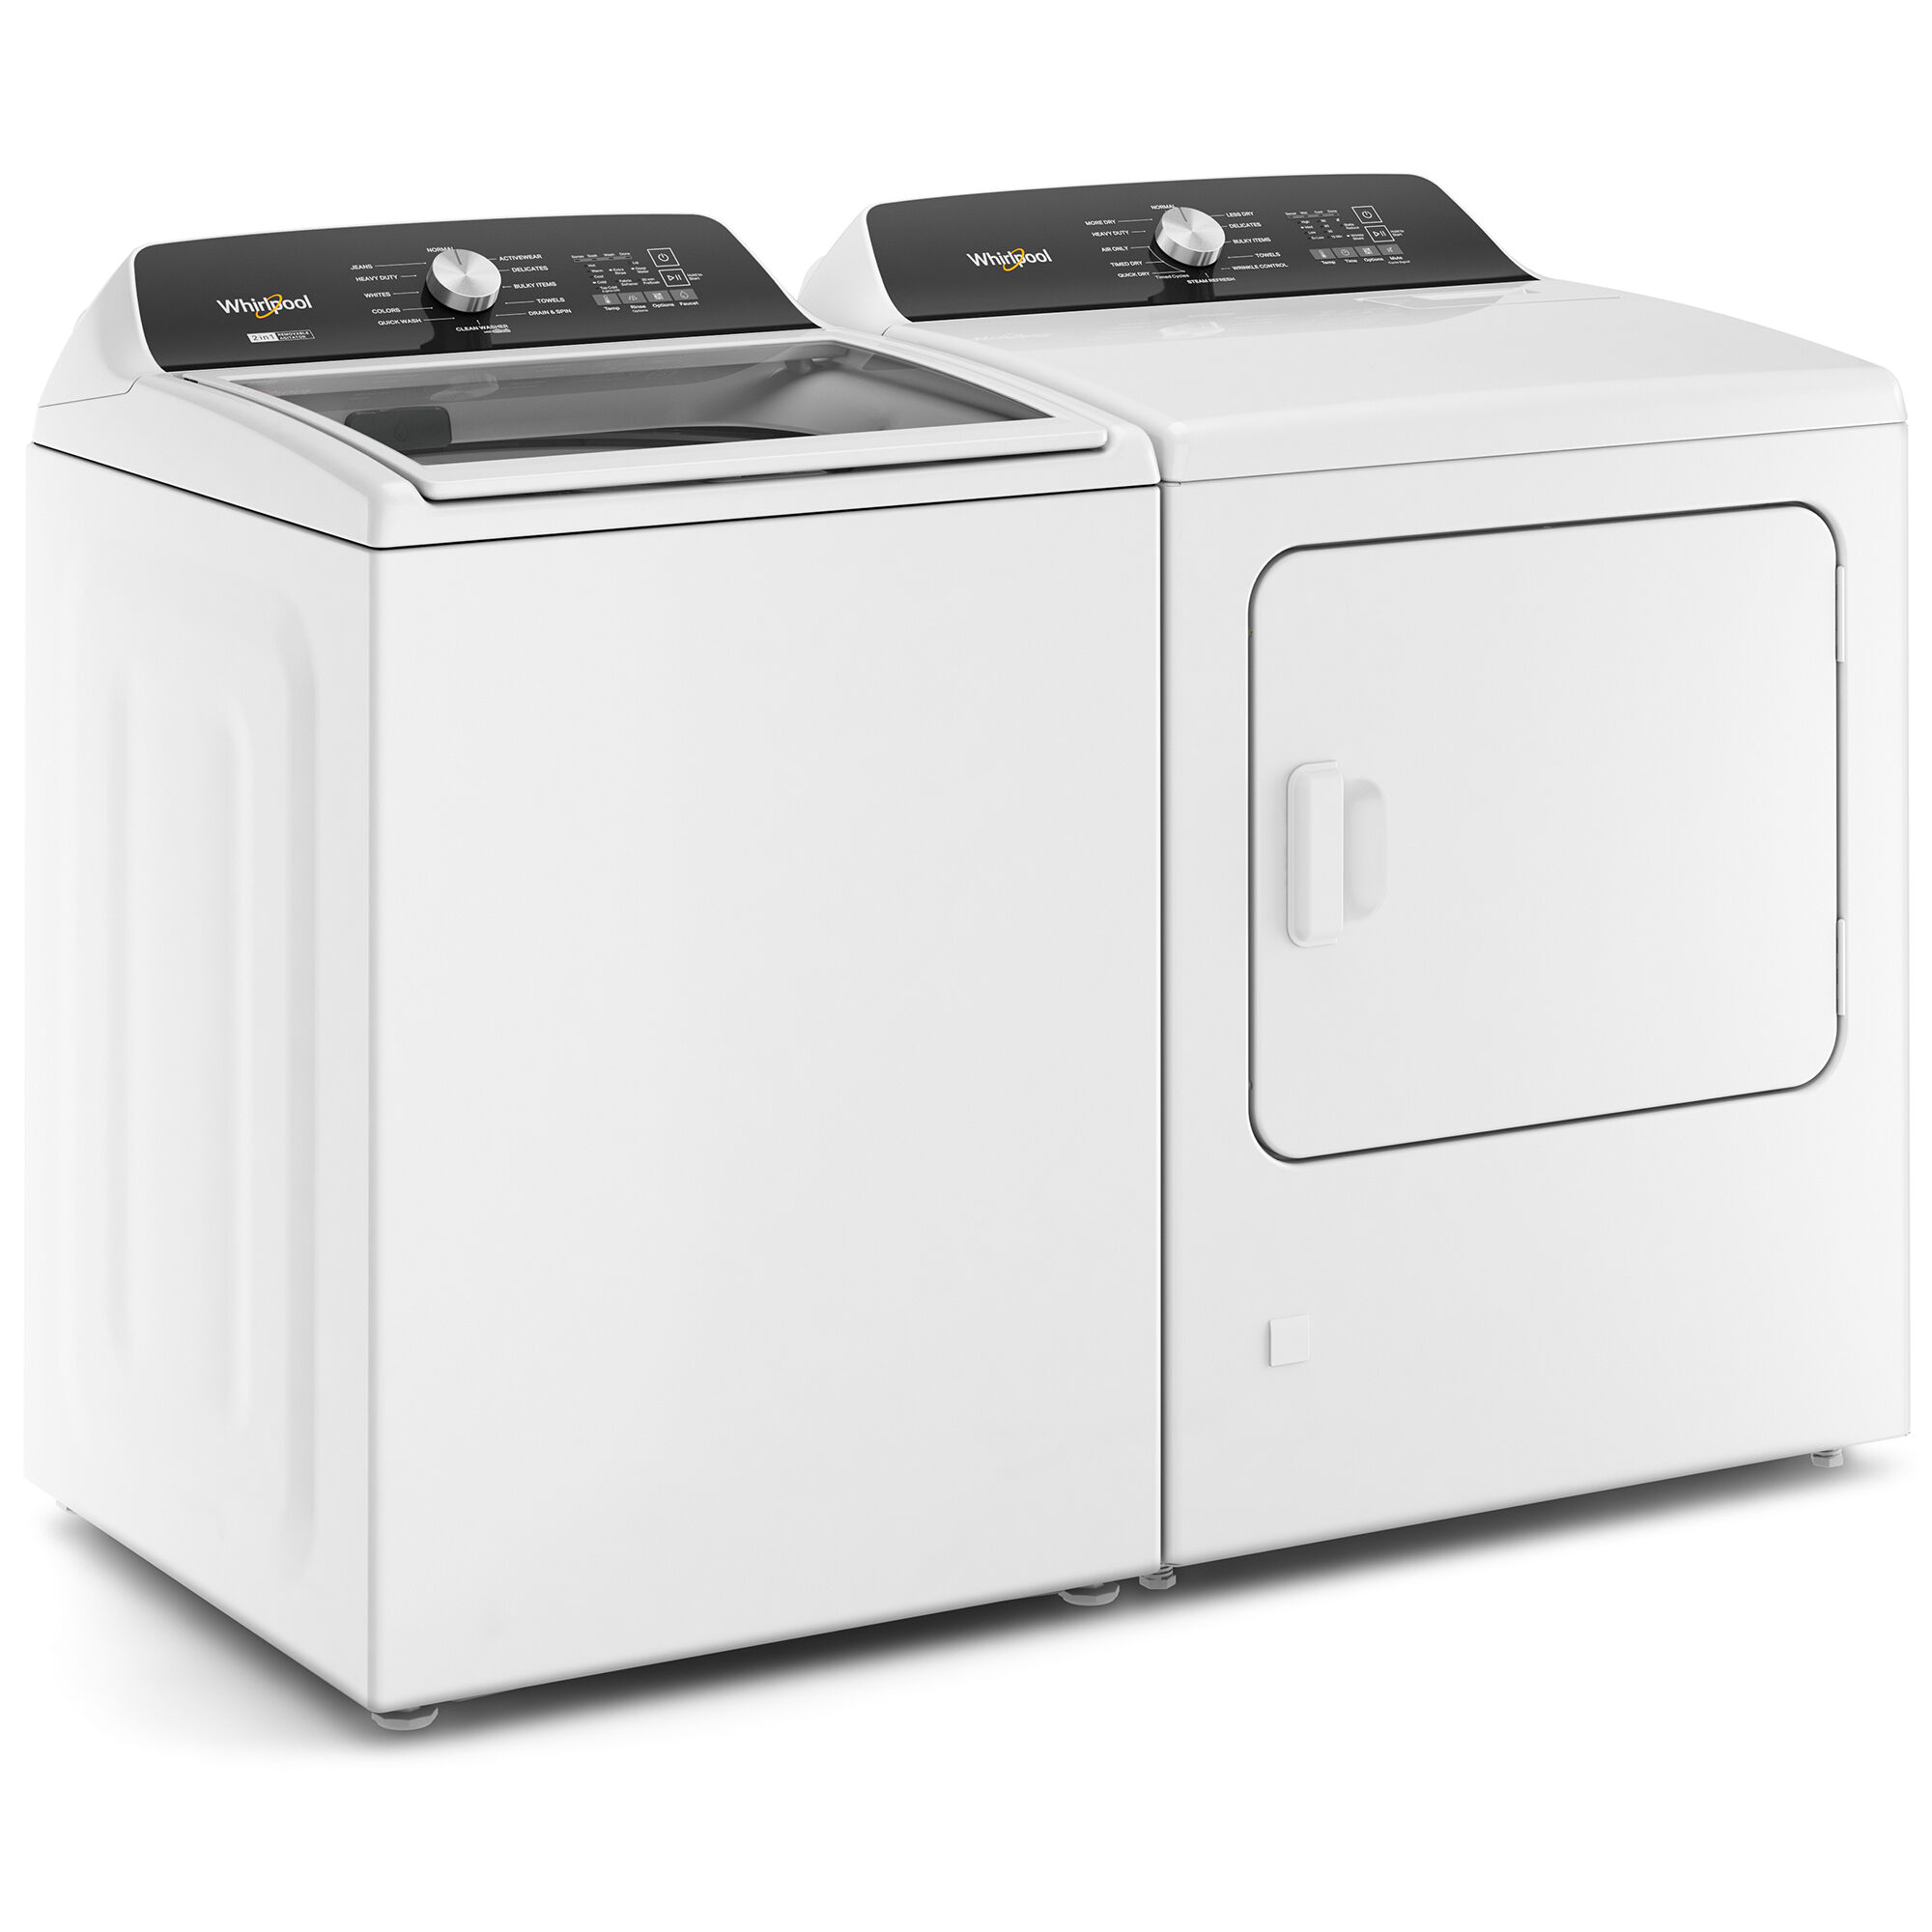 Whirlpool 27.75 in. 4.8 cu. ft. Top Load Washer with 2-in-1 